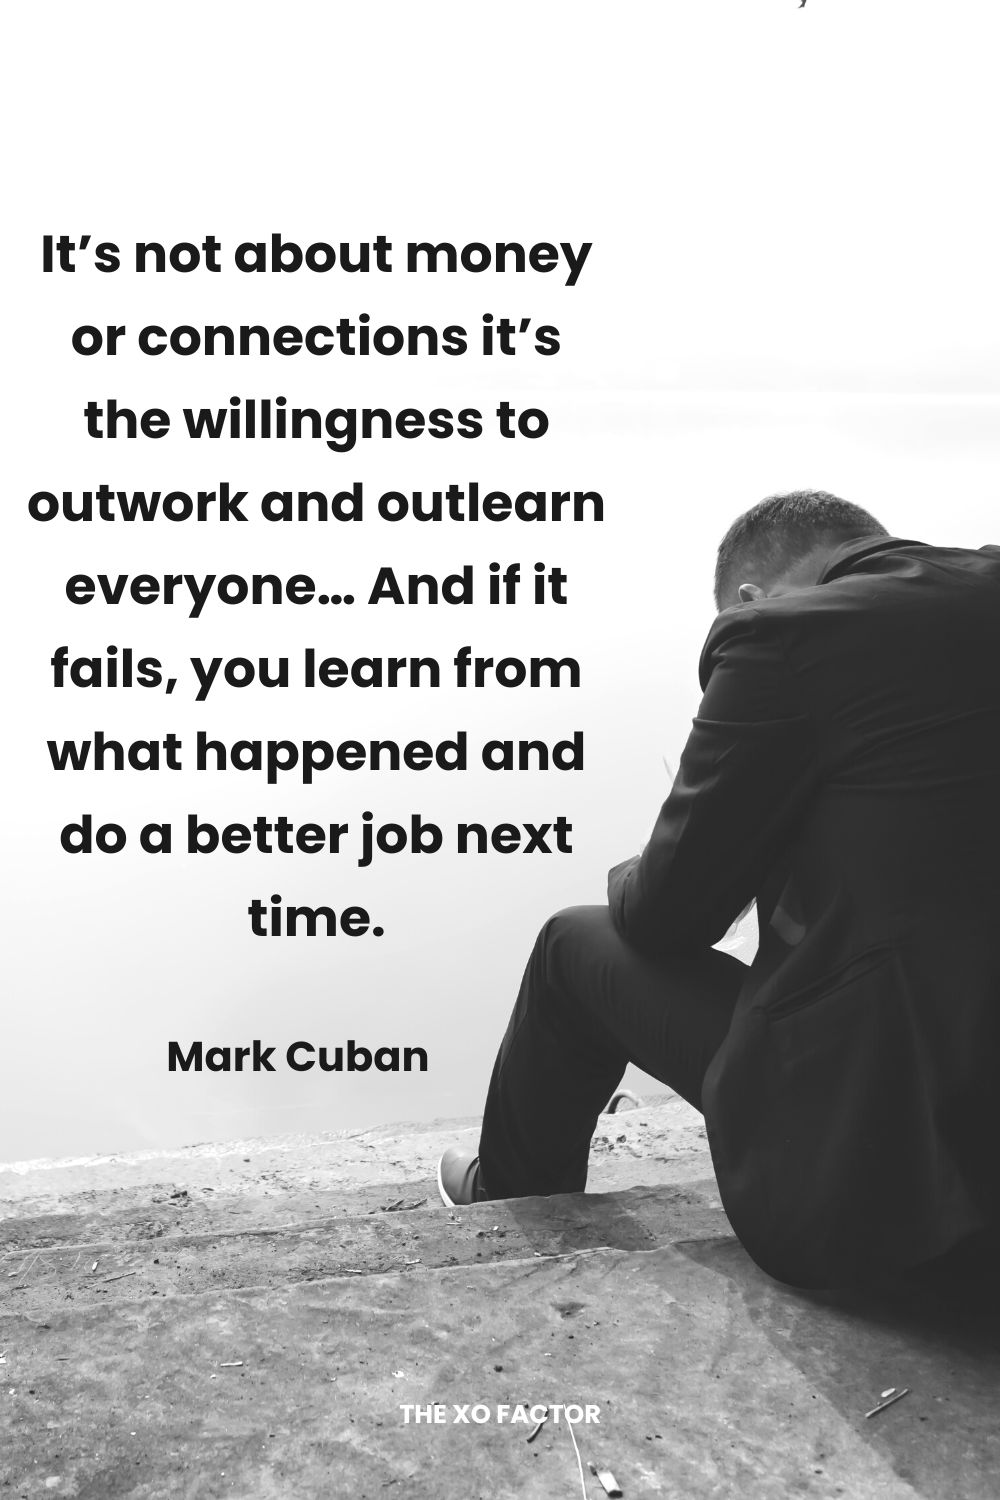 It’s not about money or connections it’s the willingness to outwork and outlearn everyone… And if it fails, you learn from what happened and do a better job next time. Mark Cuban